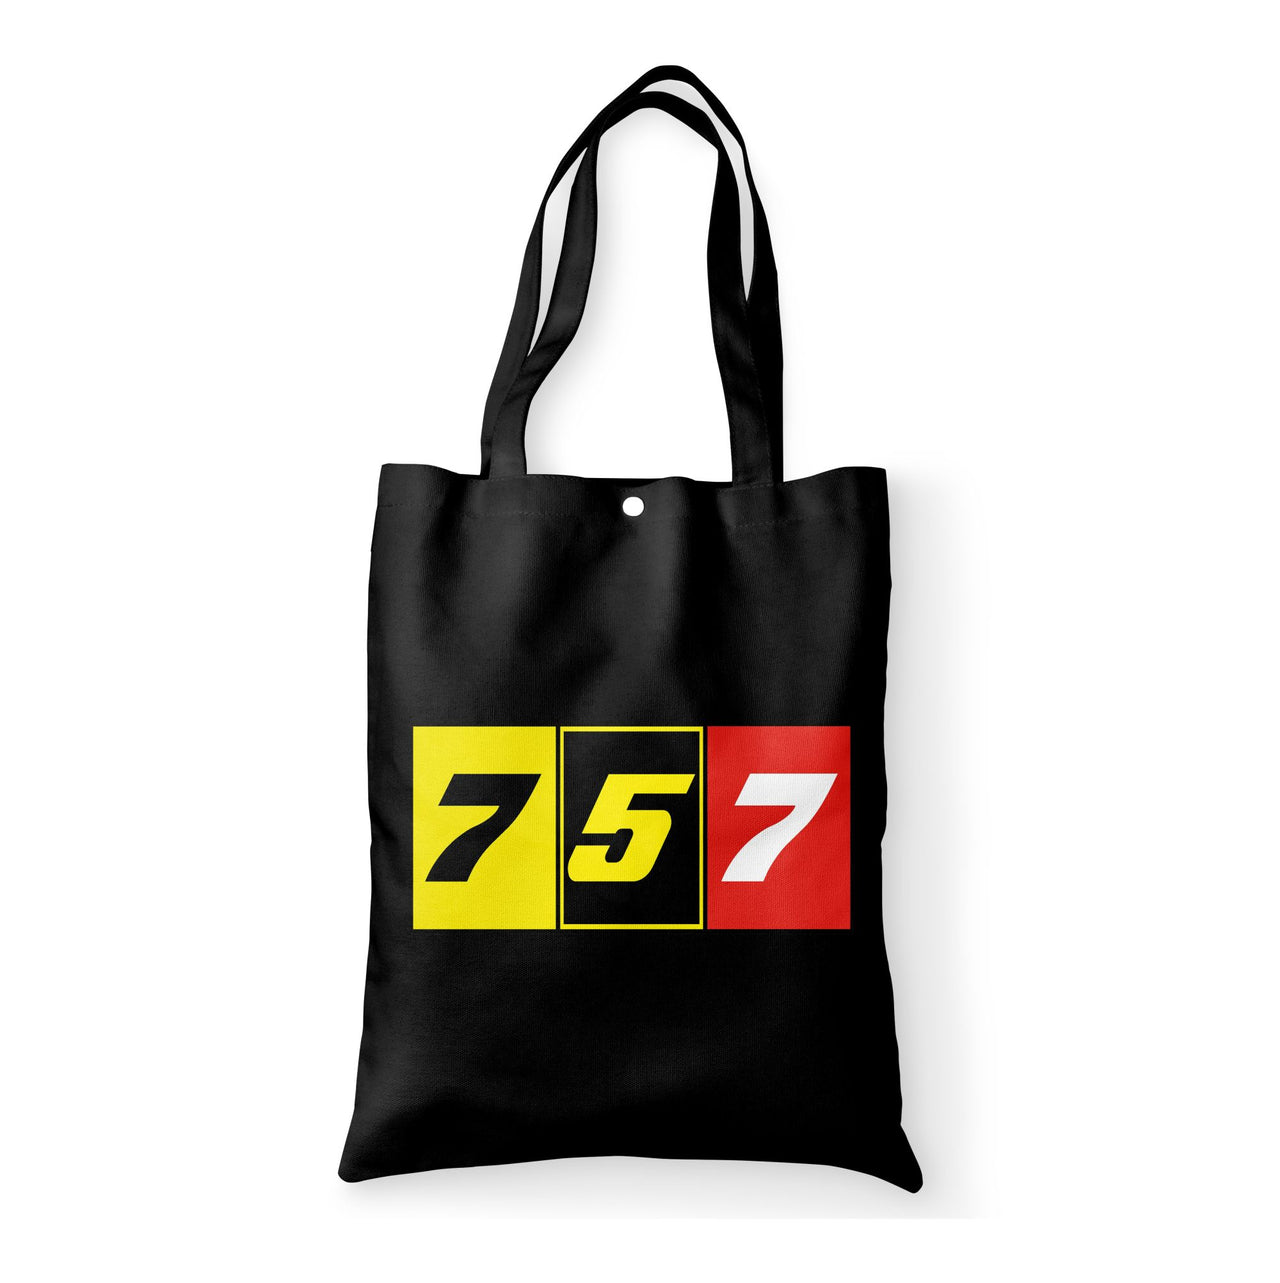 Flat Colourful 757 Designed Tote Bags